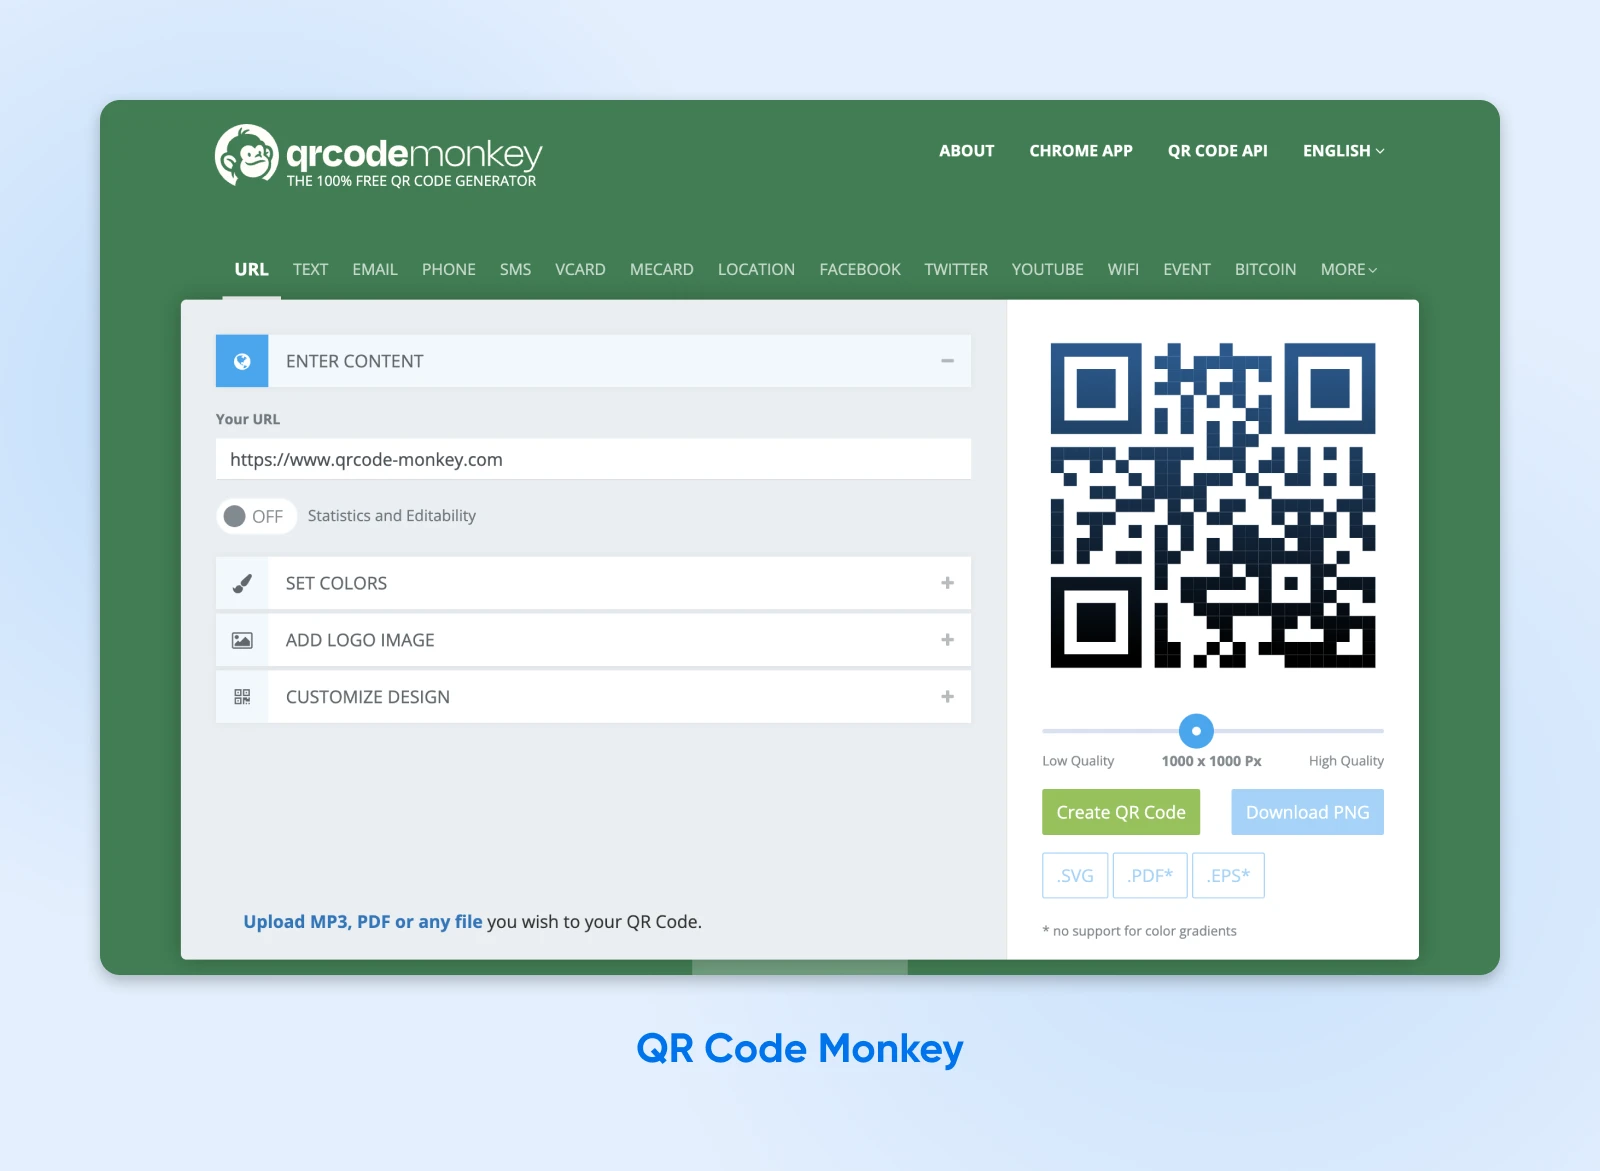 QR Code Monkey lets you create customized QR codes to take you to a URL. The homepage is green.